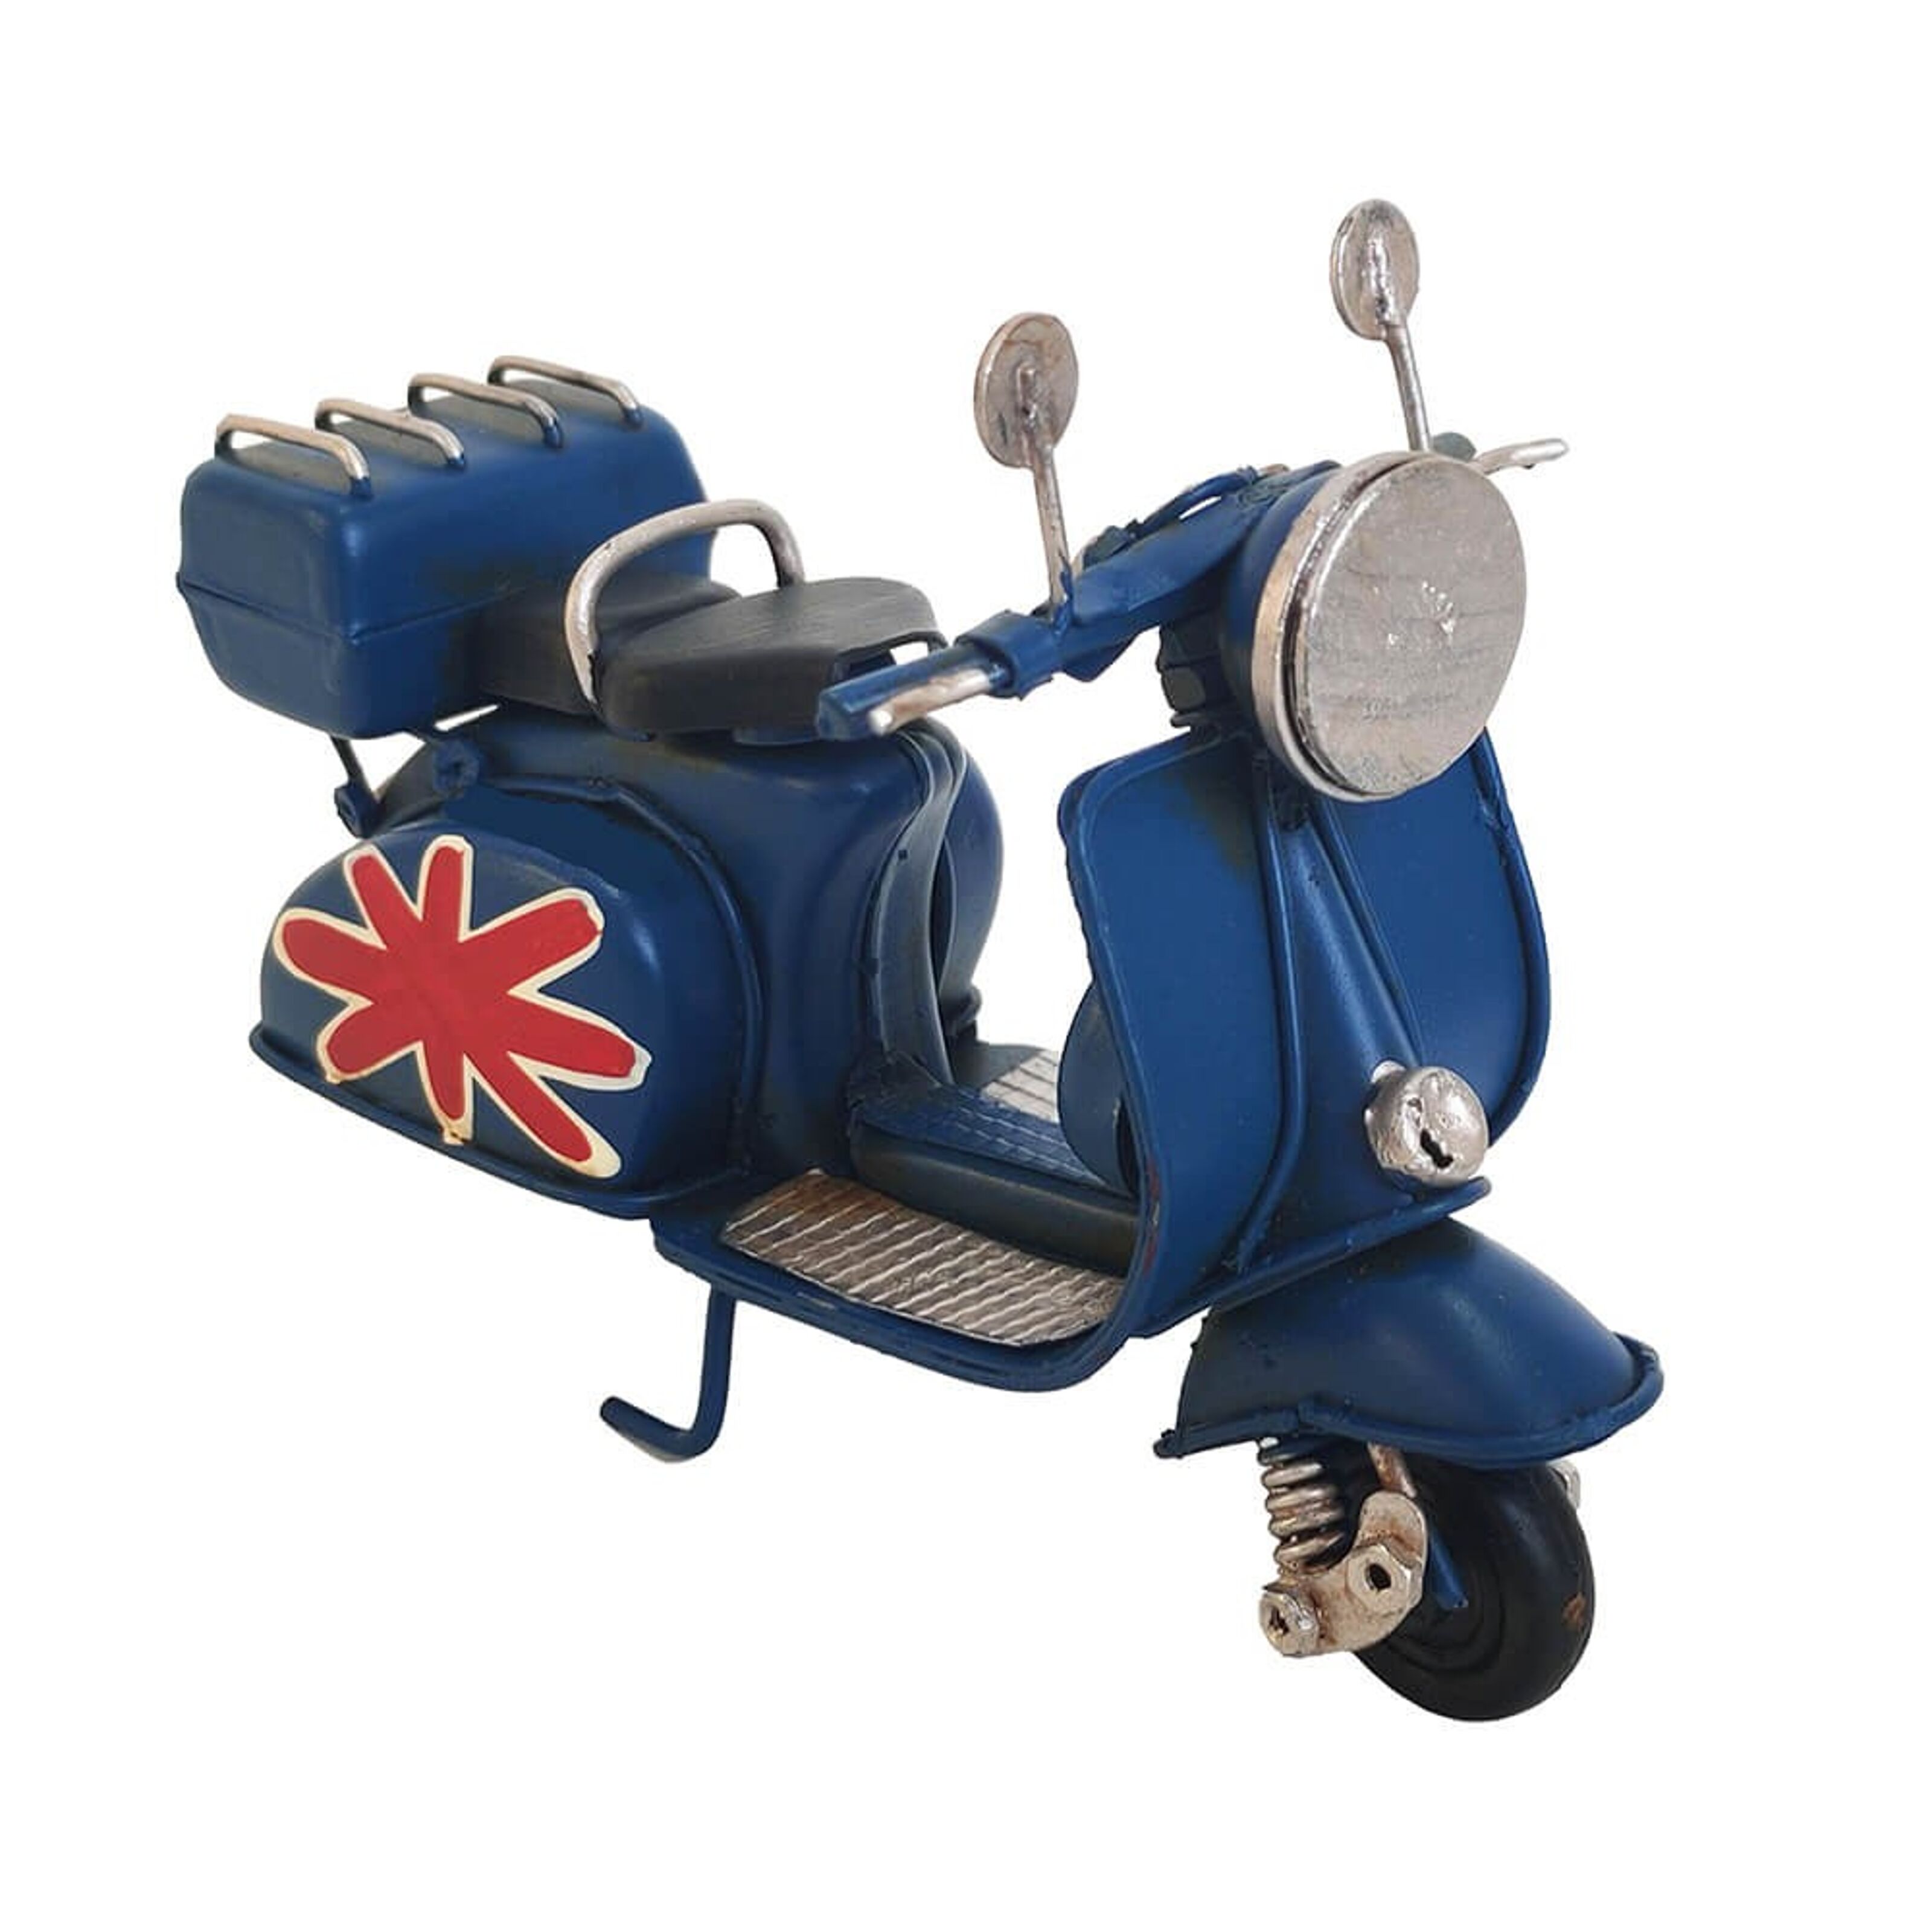 Blue scooter miniature, vintage, collectible, Italian style scooter, tin